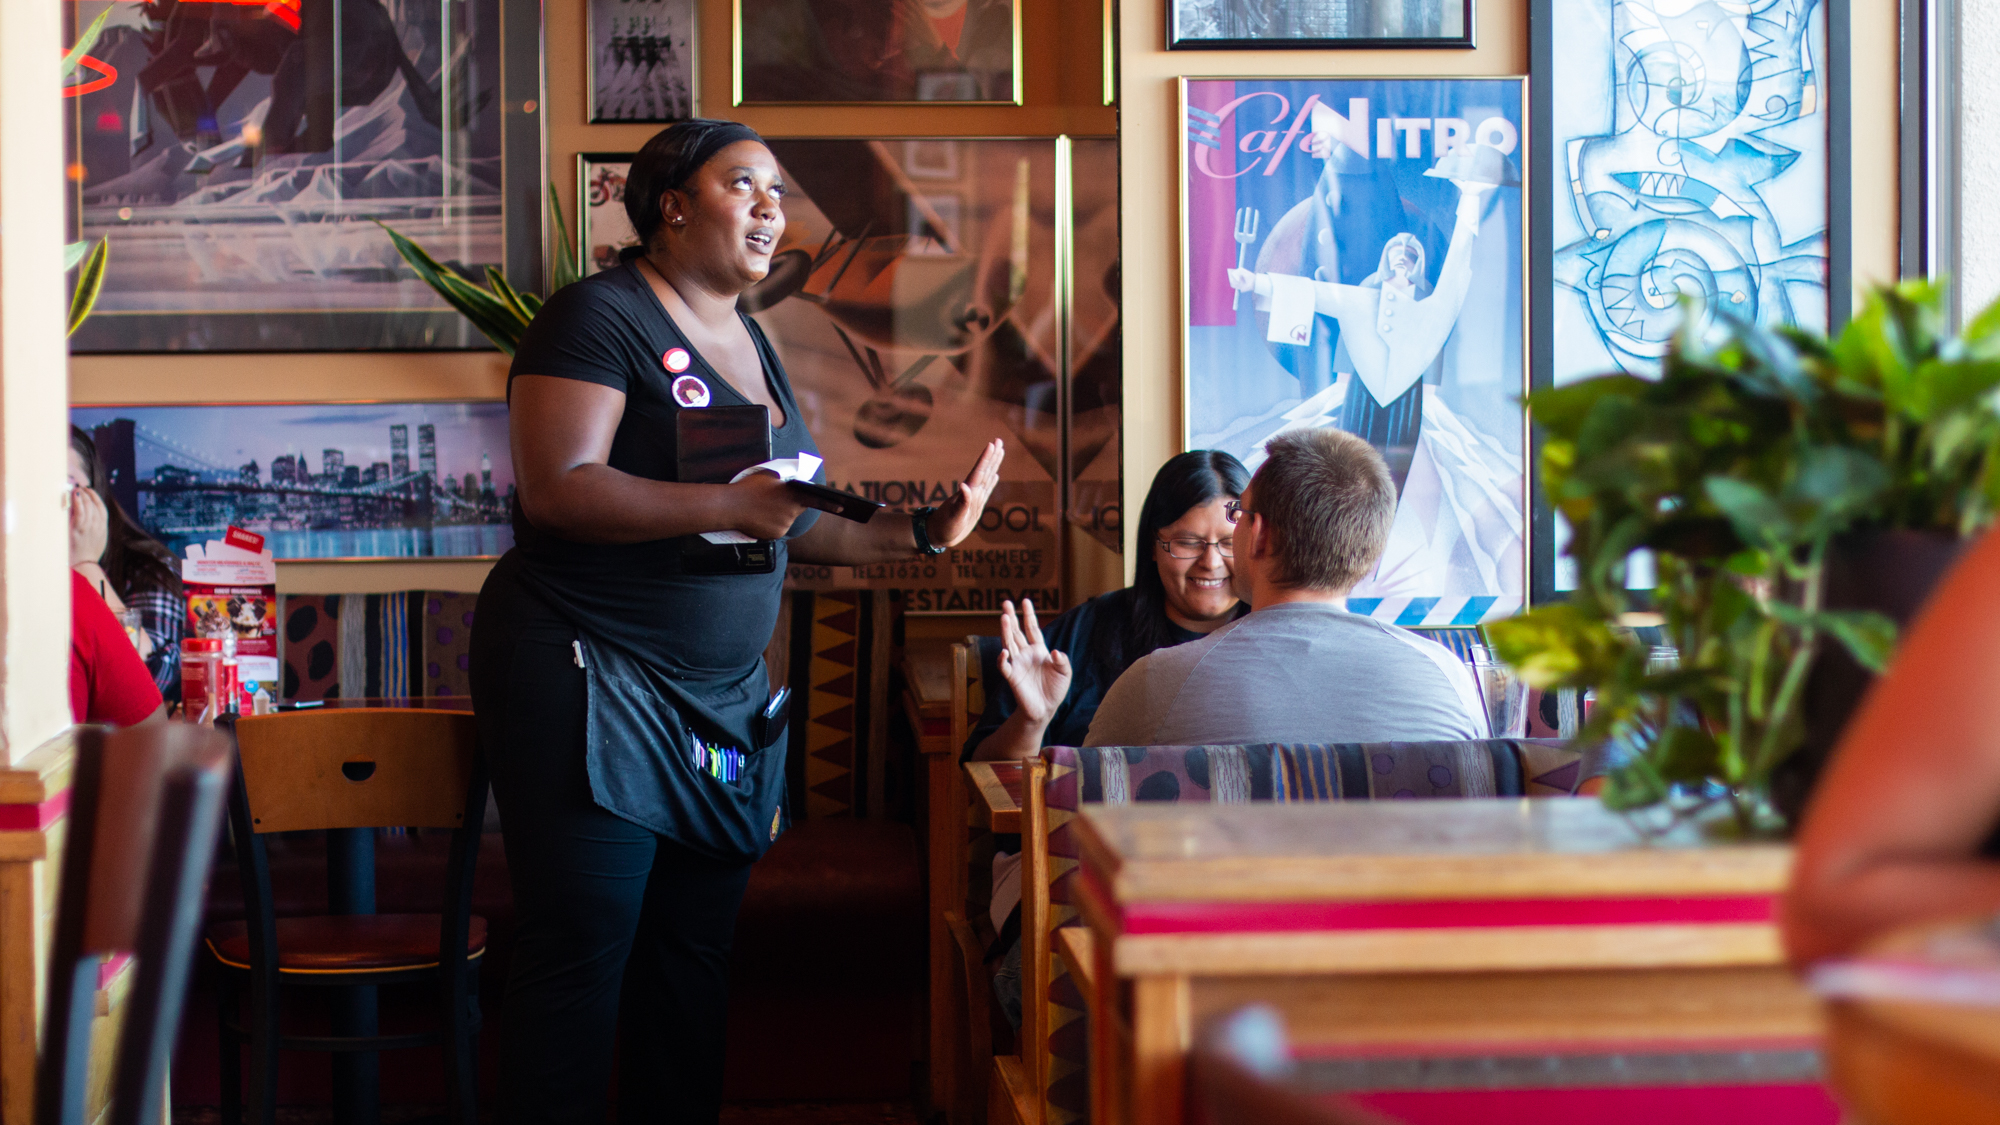  Chiniqua Bright jokes with a customer while waiting tables at Red Robin on Sept. 29, 2018. Beginning as a server at the restaurant, Bright quickly advanced to bartender and lead trainer.  